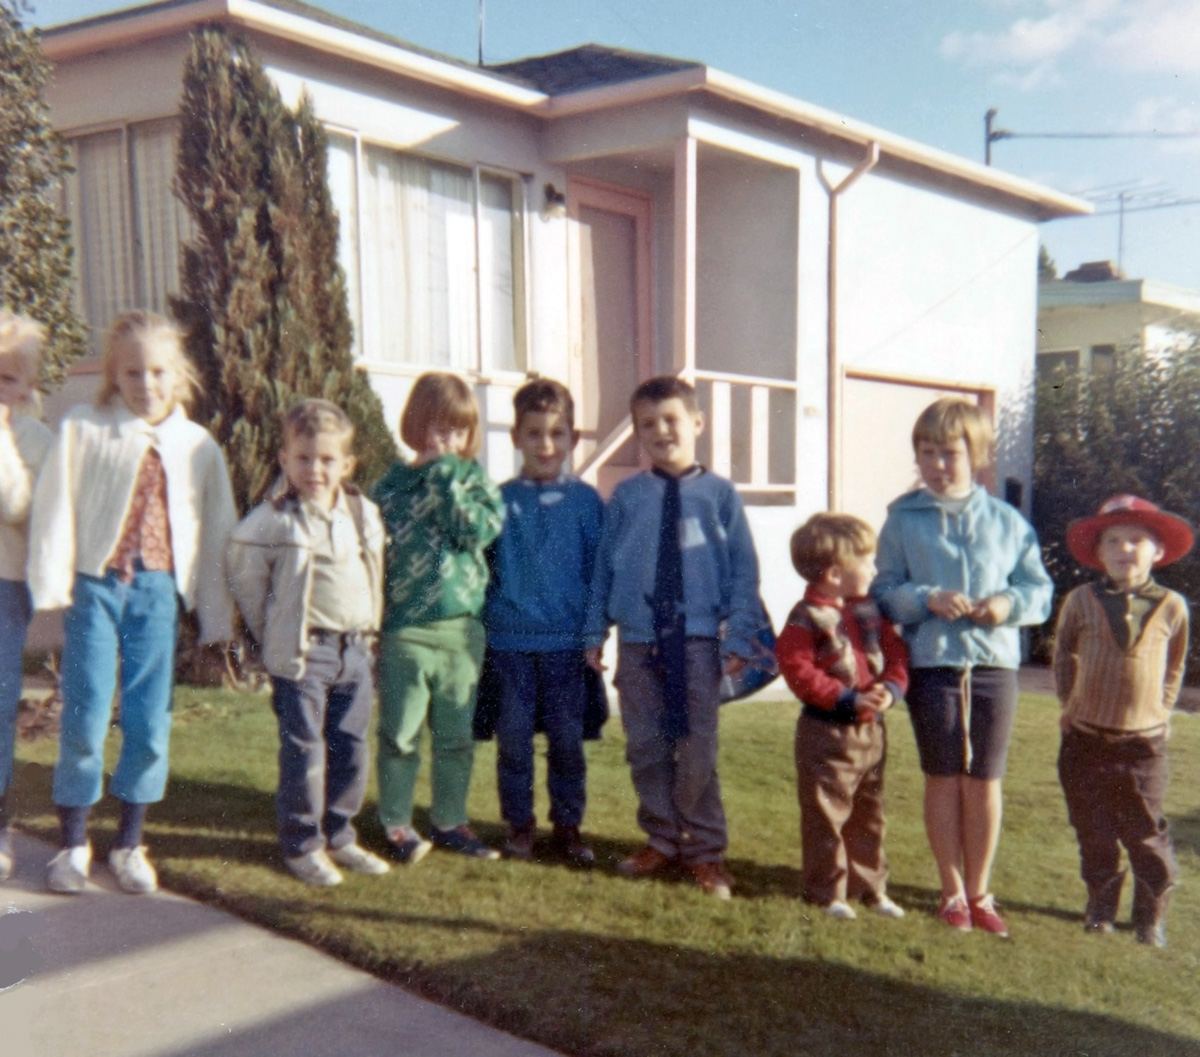 Charles M. Schulz knew what he was doing when he penned his "Peanuts" comic strip. Neighborhoods were full of little kids back in the '50s and '60s and this is just a part of our neighborhood kid population. I'm in the red, third from right and my older sister is second from right in the blue windbreaker and my other sister is in the green jacket. East Richmond Heights near San Francisco, 1966. View full size.